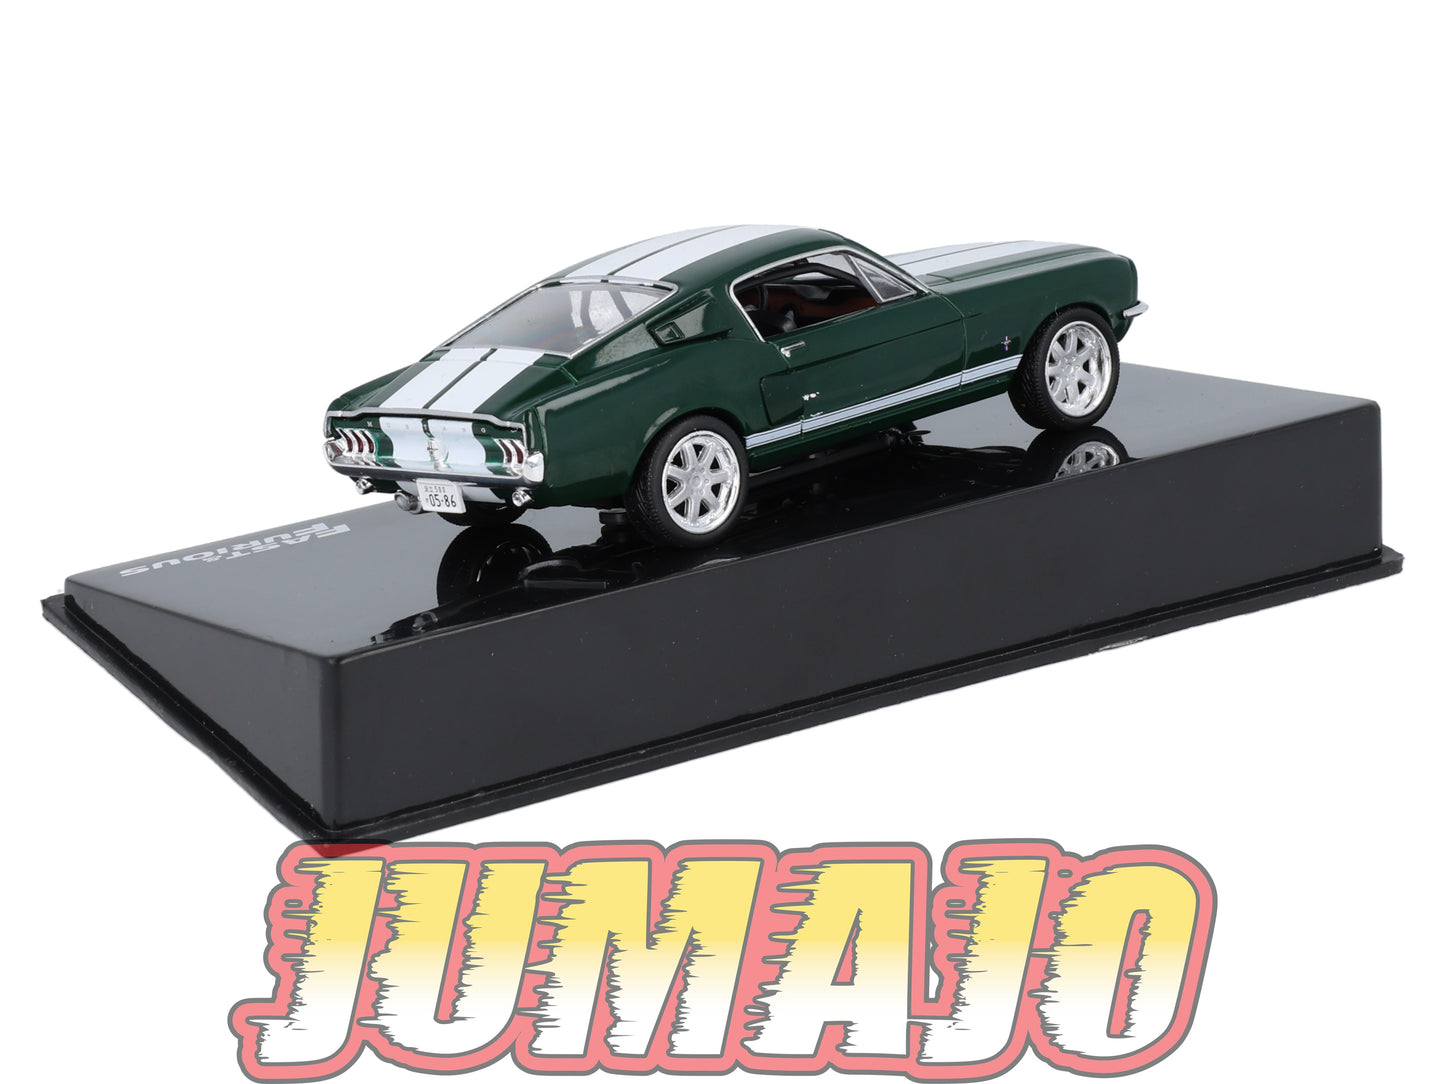 FF7 Voiture 1/43 IXO altaya Fast and Furious : Ford Mustang Fastback